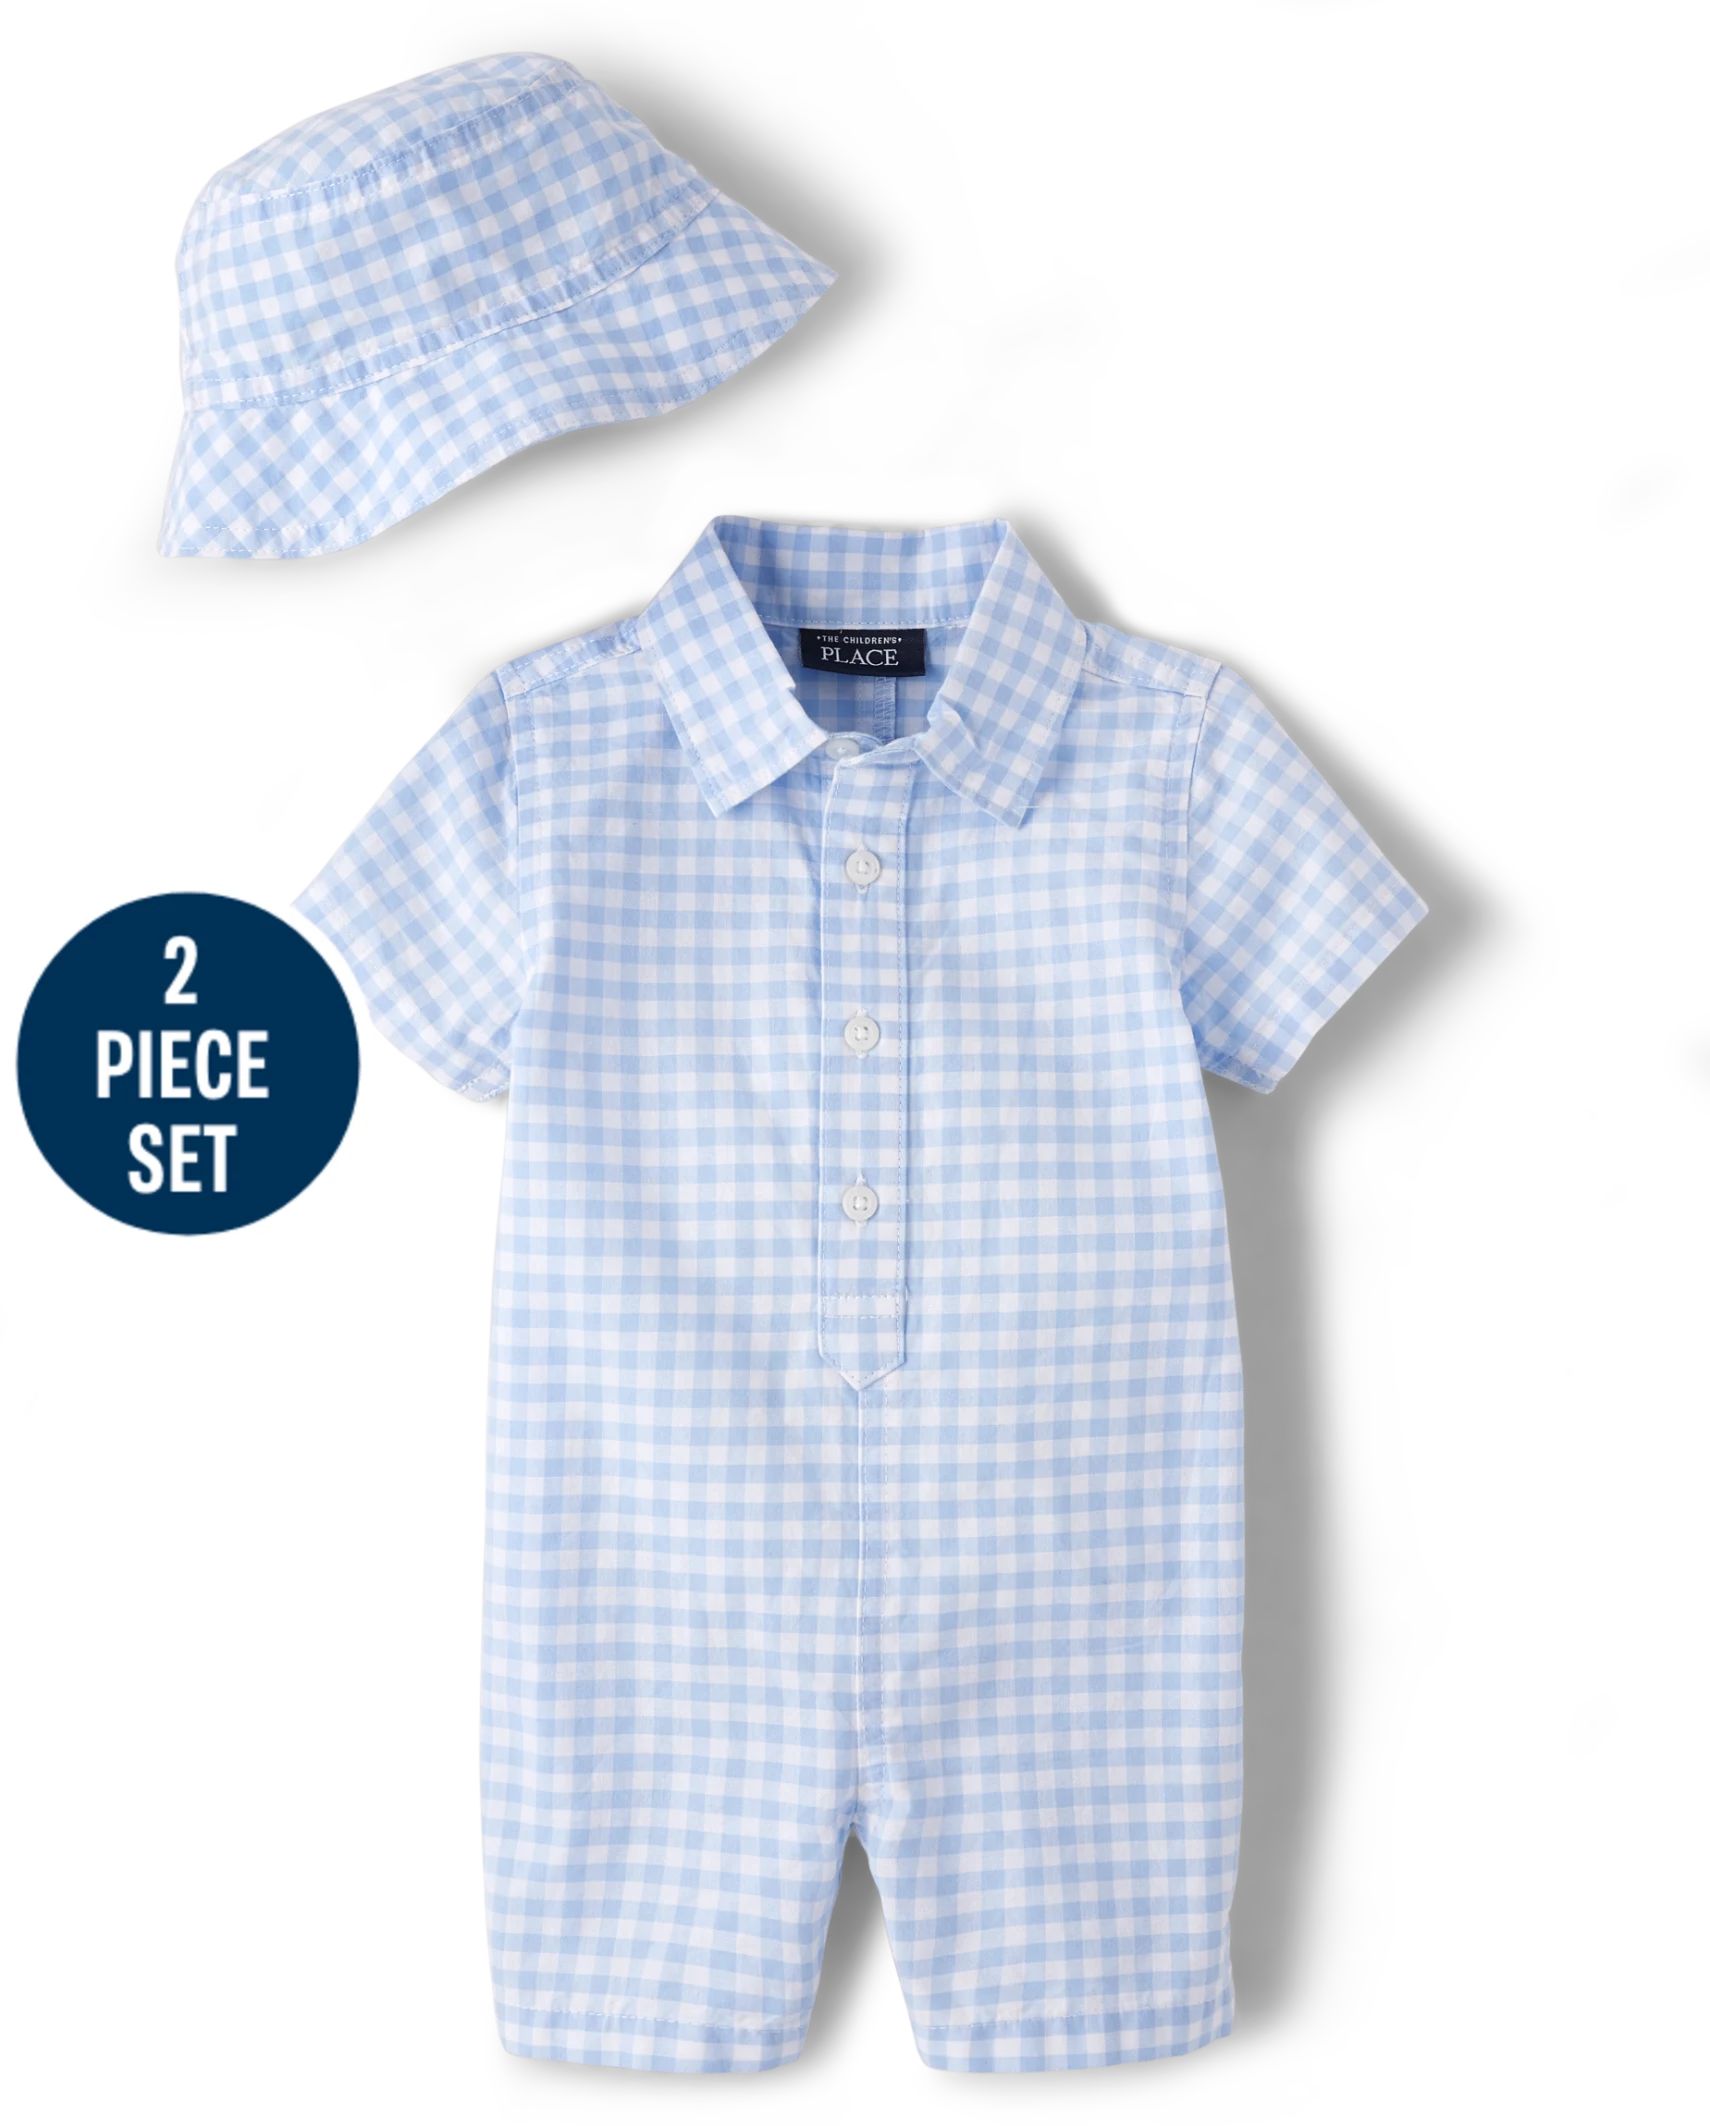 Baby Boys Gingham Romper Outfit Set - whirlwind | The Children's Place